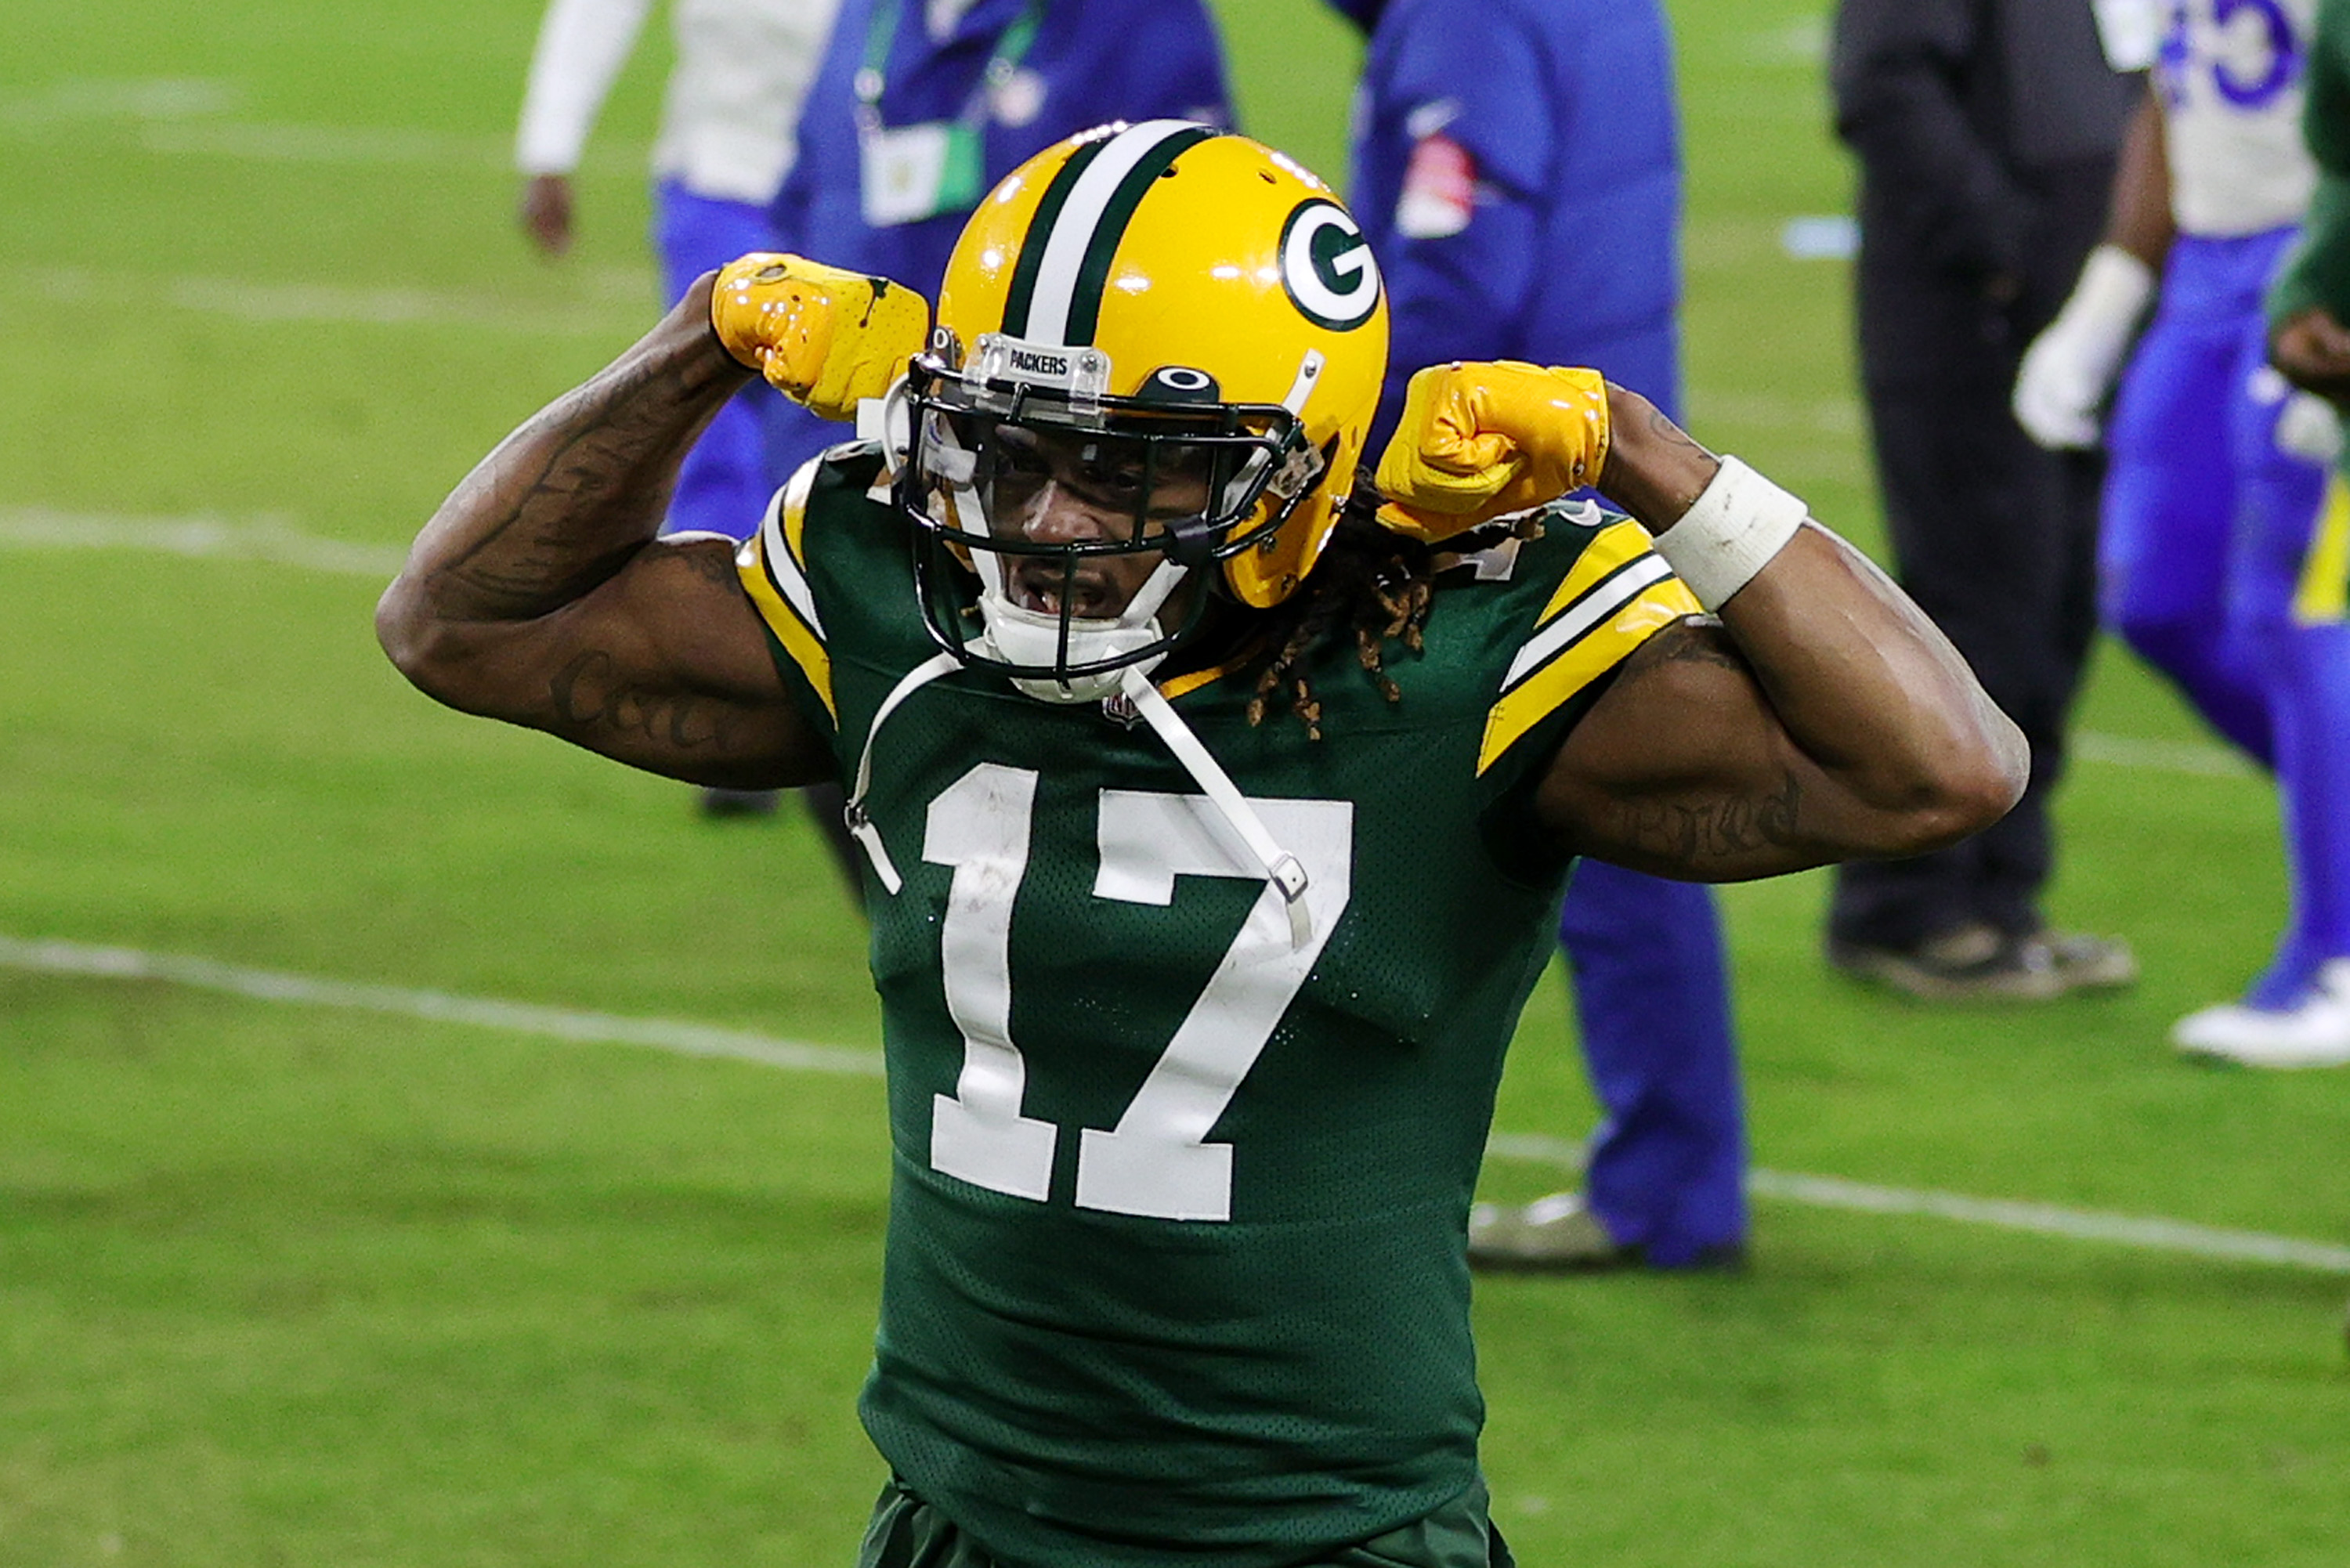 Davante Adams of the Green Bay Packers celebrates defeating the Rams